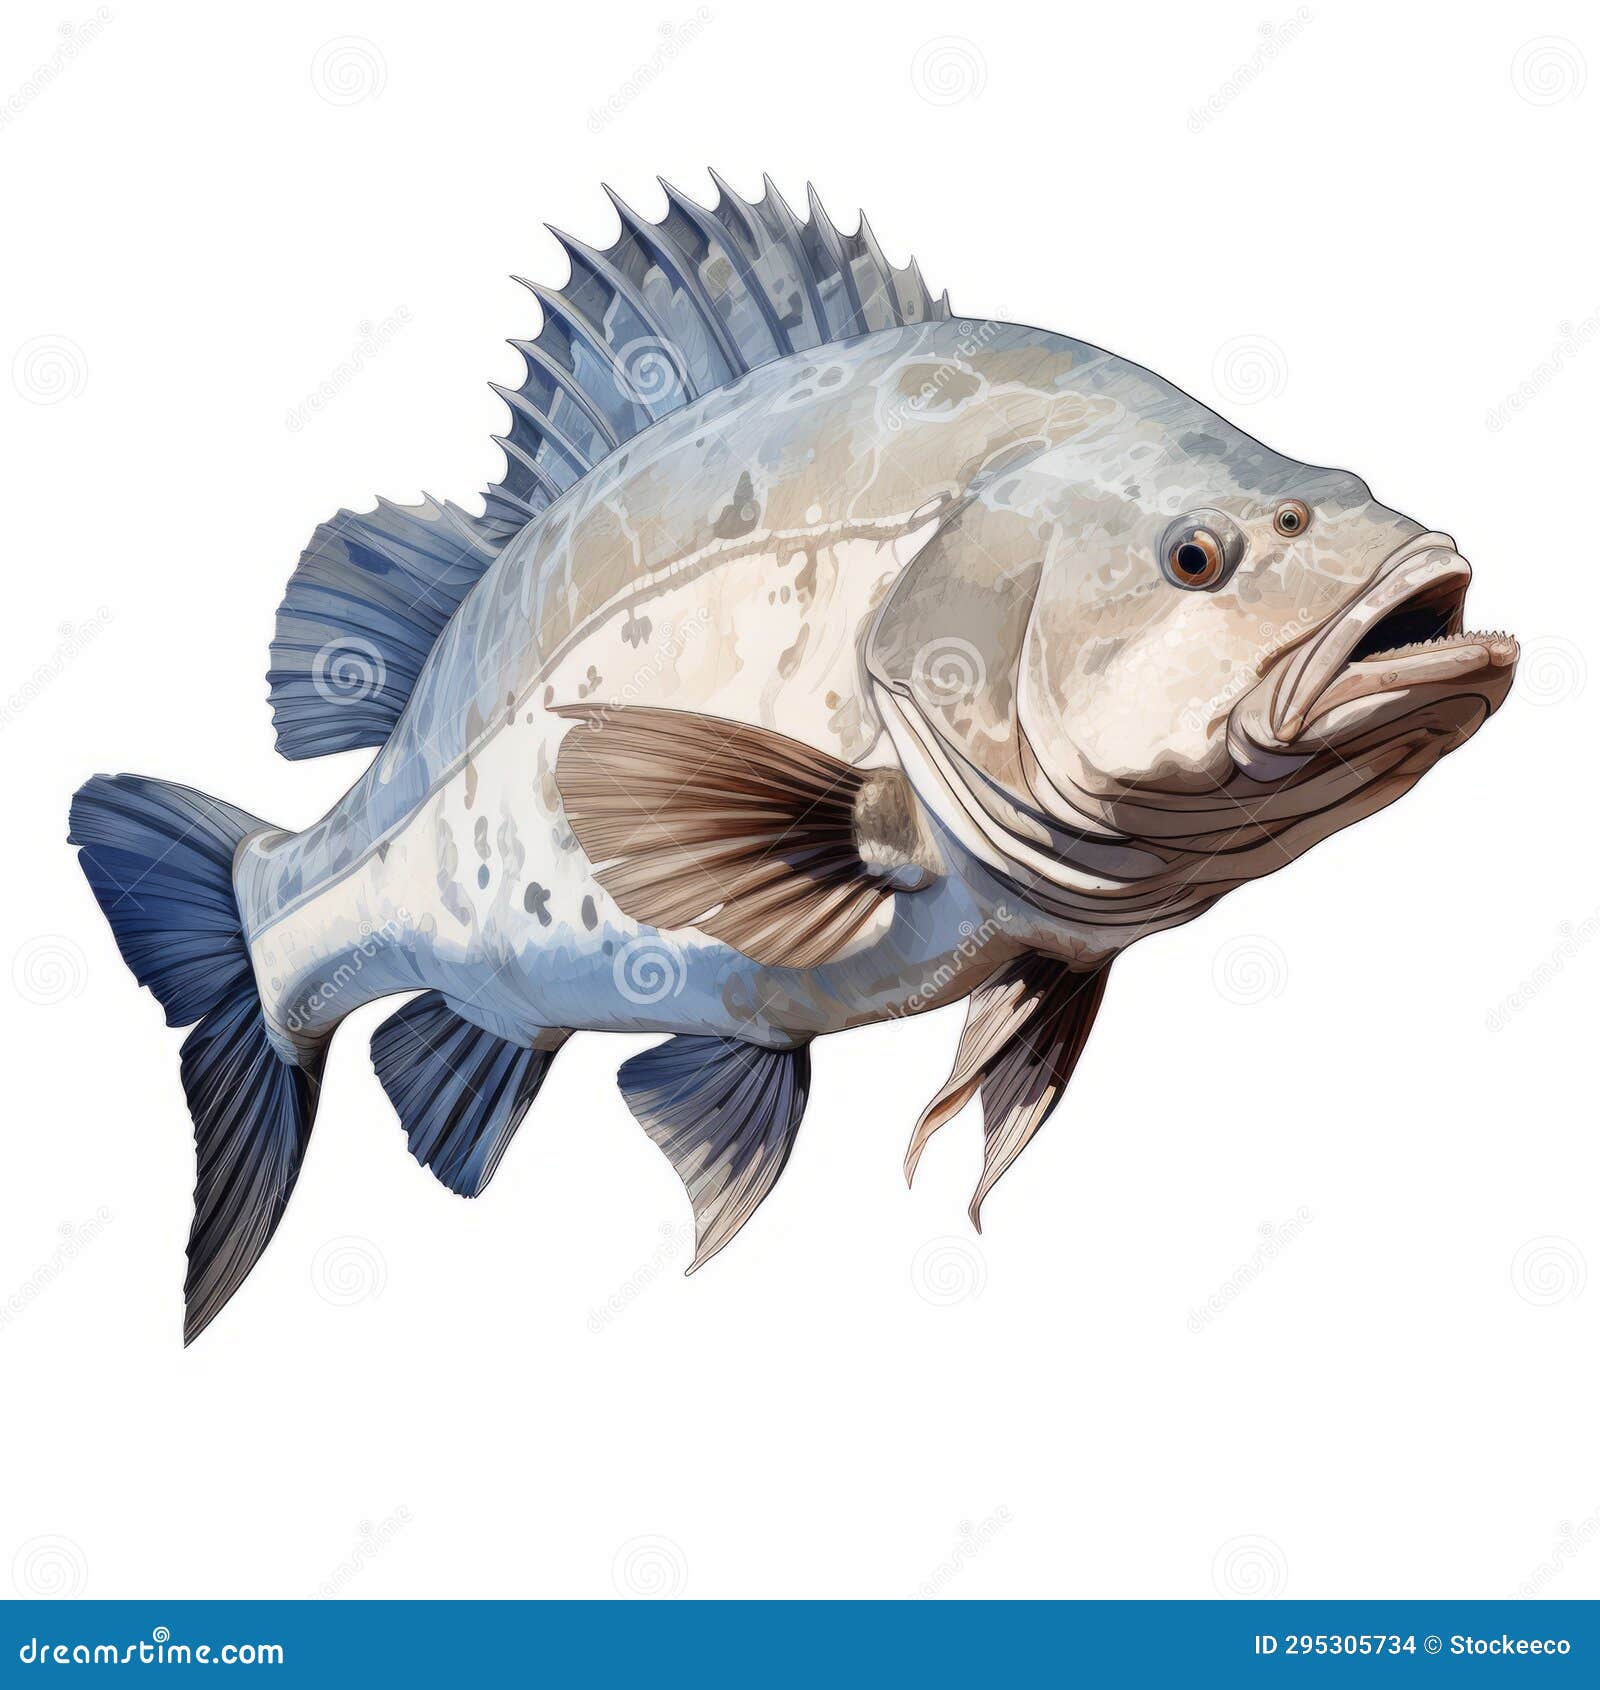 Hyperrealistic Illustration of Enormous Swimming Halibut Stock